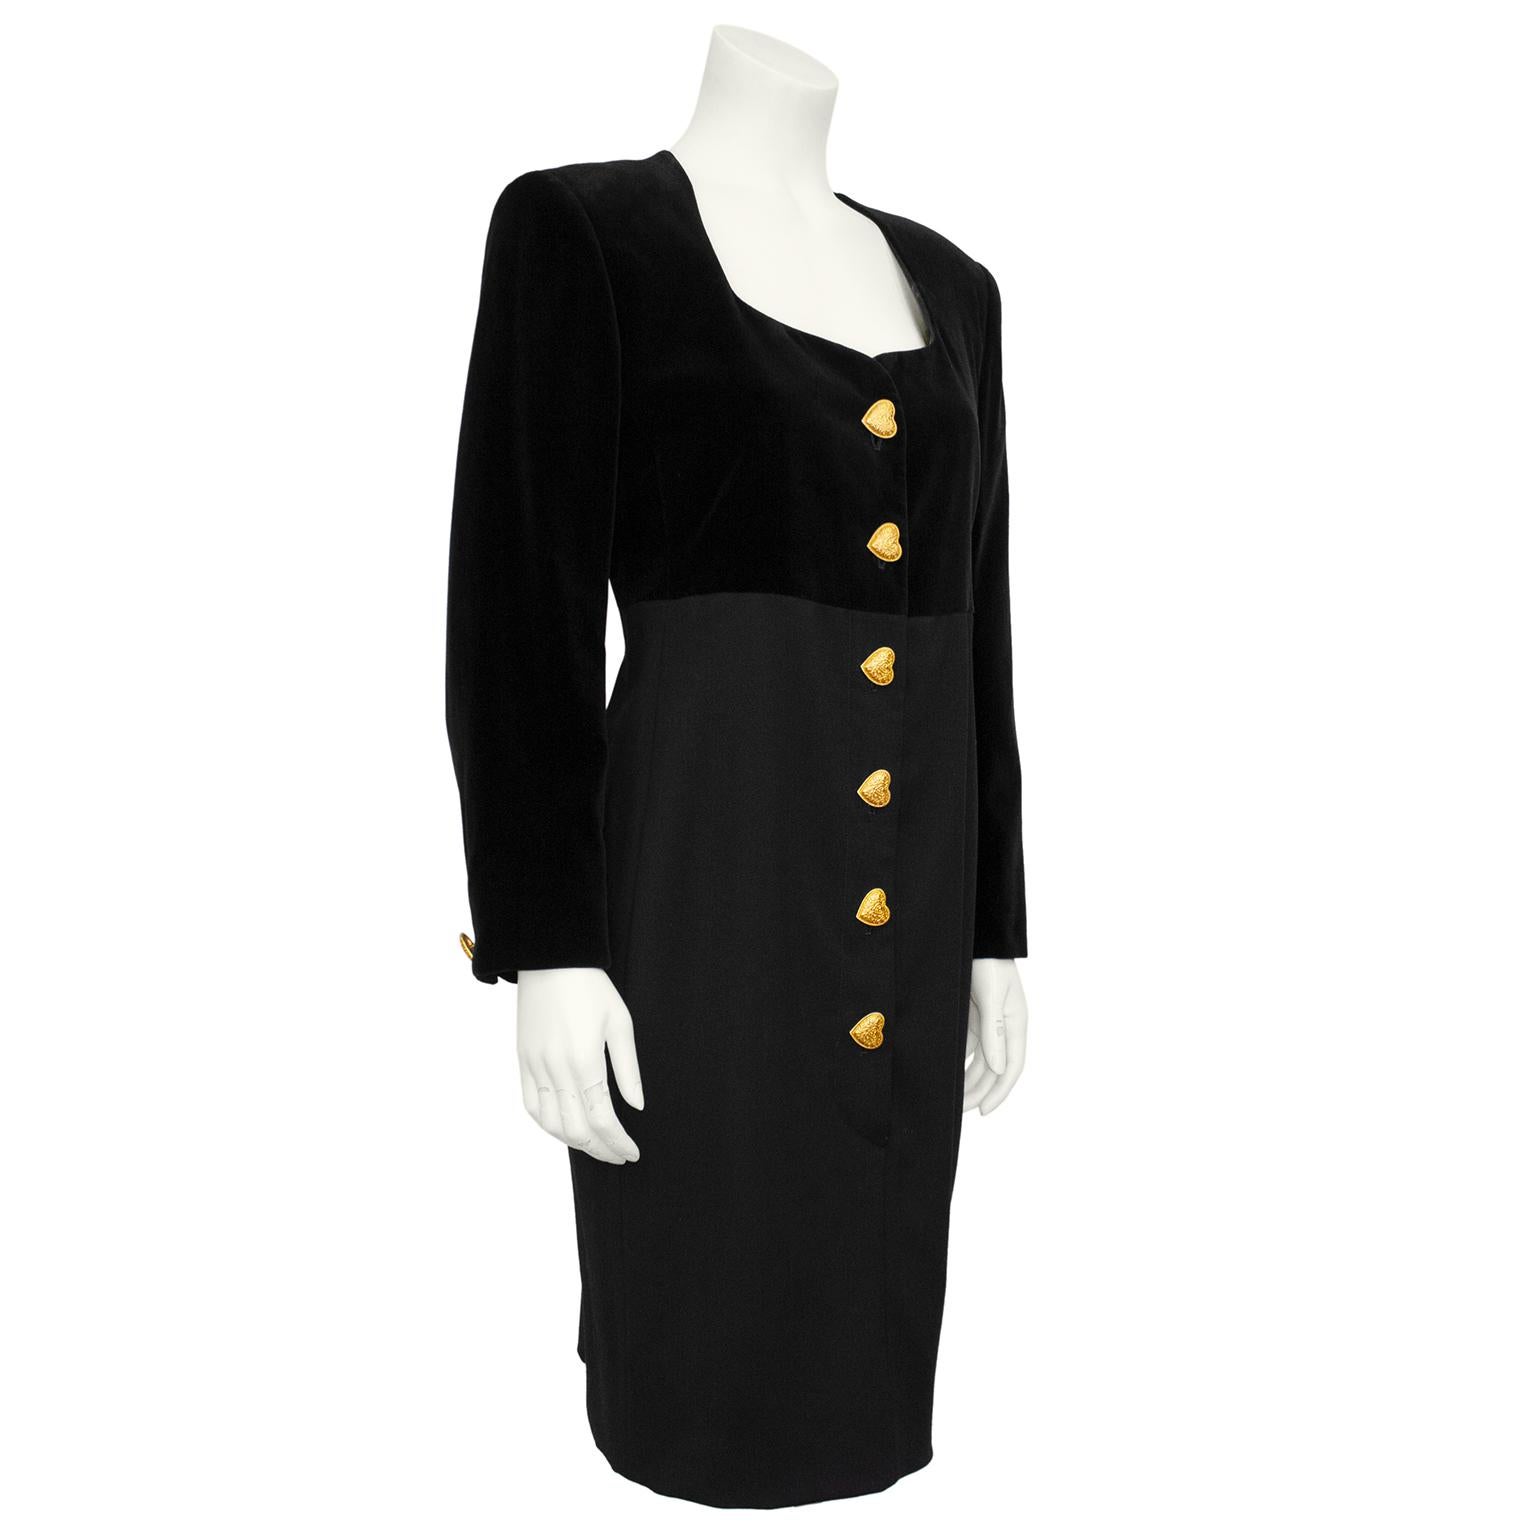 Excellent condition black velvet and wool body-con dress very inspired by the popular YSL dresses from the 1980's. Sweet-heart neckline complimented by heart shaped gilt metal buttons down the front and on the cuffs with raised design work including